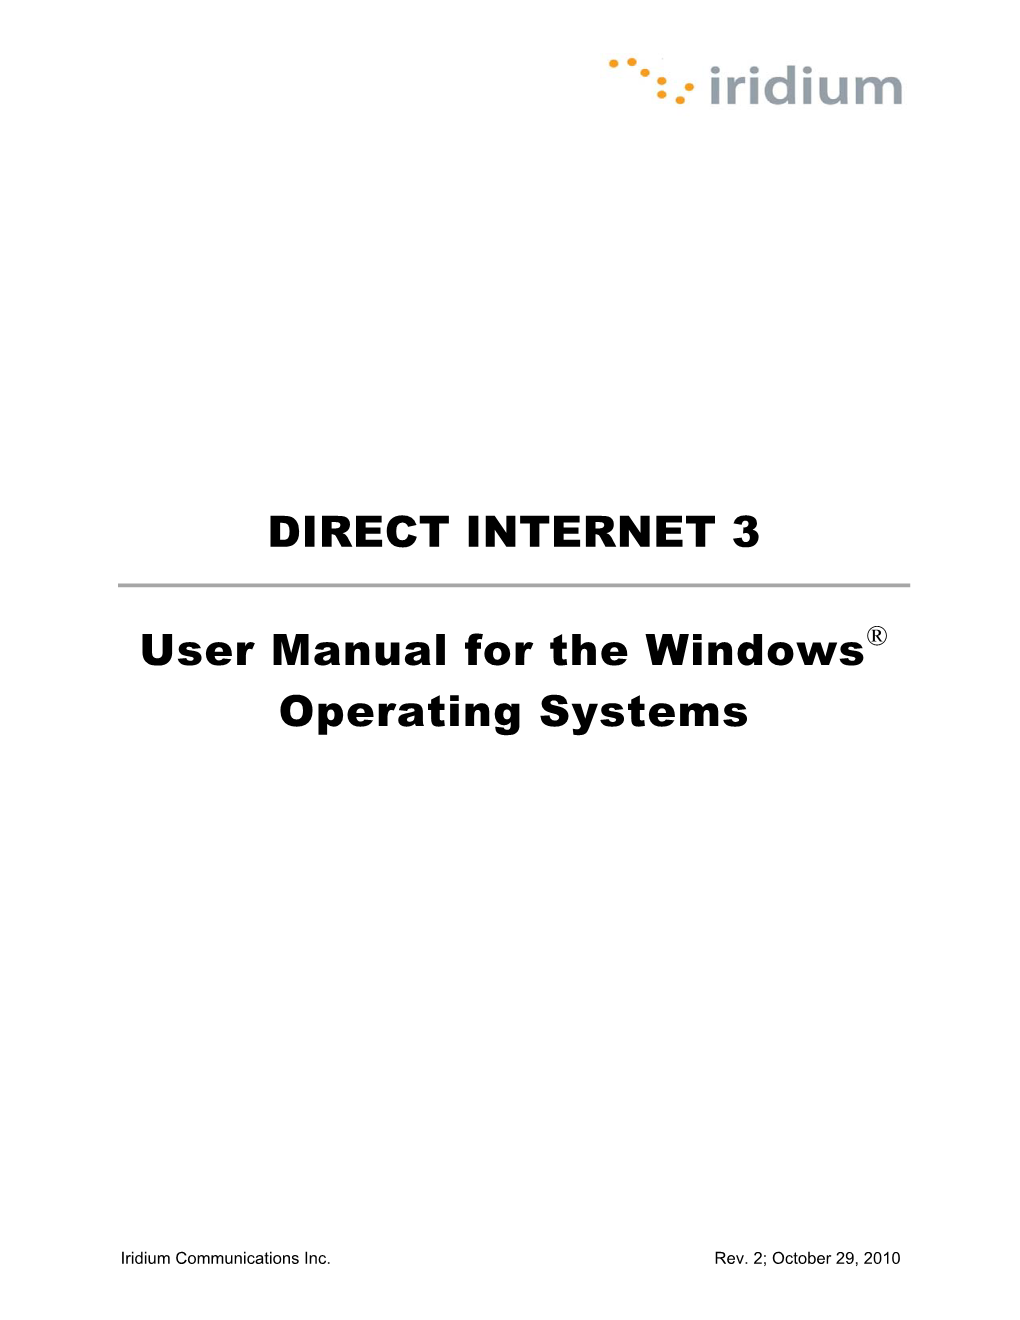 DIRECT INTERNET 3 User Manual for the Windows® Operating Systems